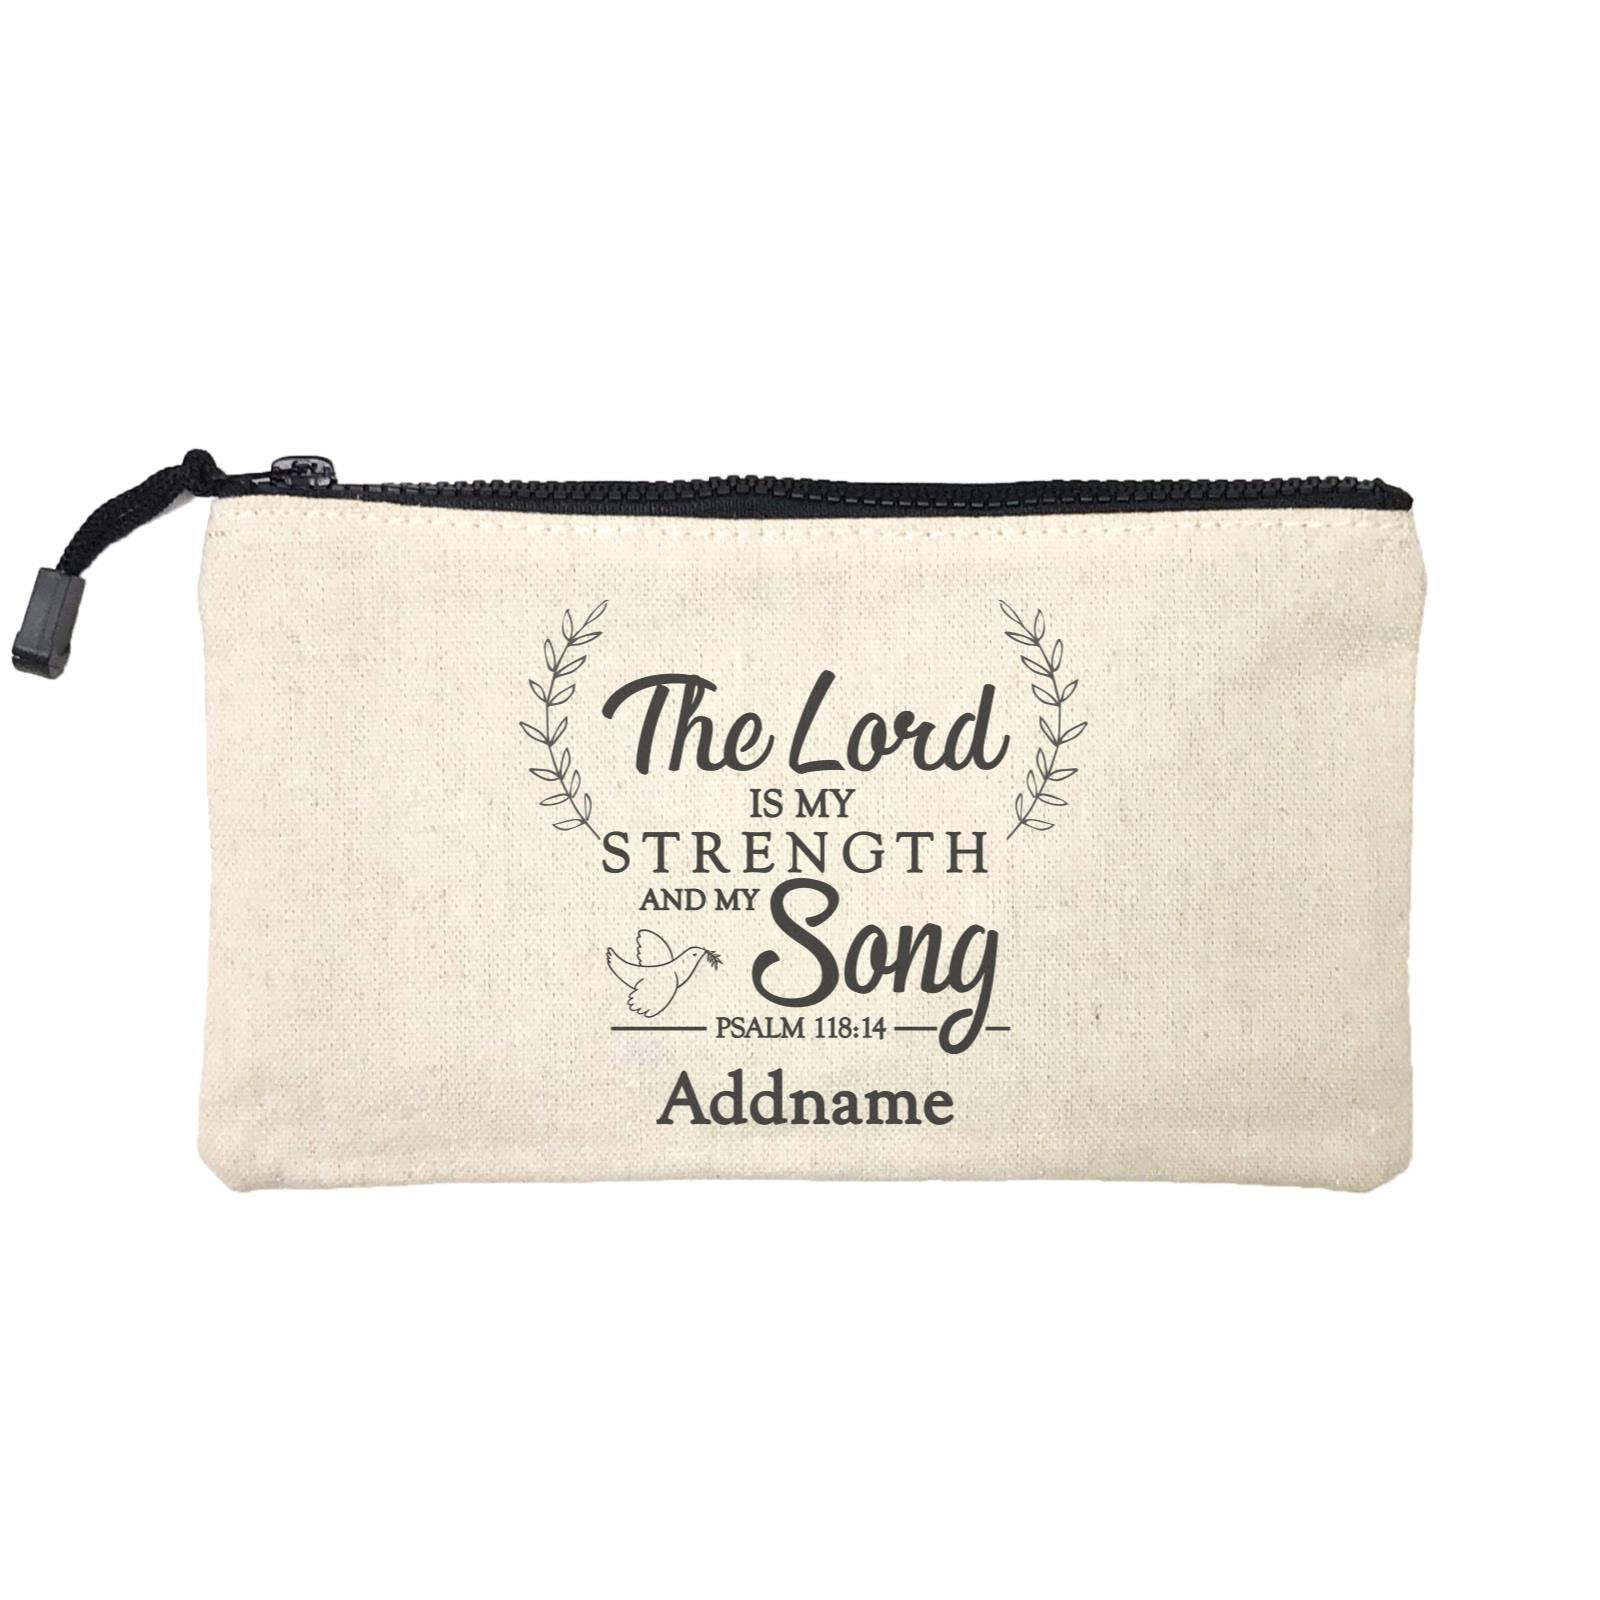 Christian Series The Lord Is My Strength Song Psalm 118.14 Addname Mini Accessories Stationery Pouch